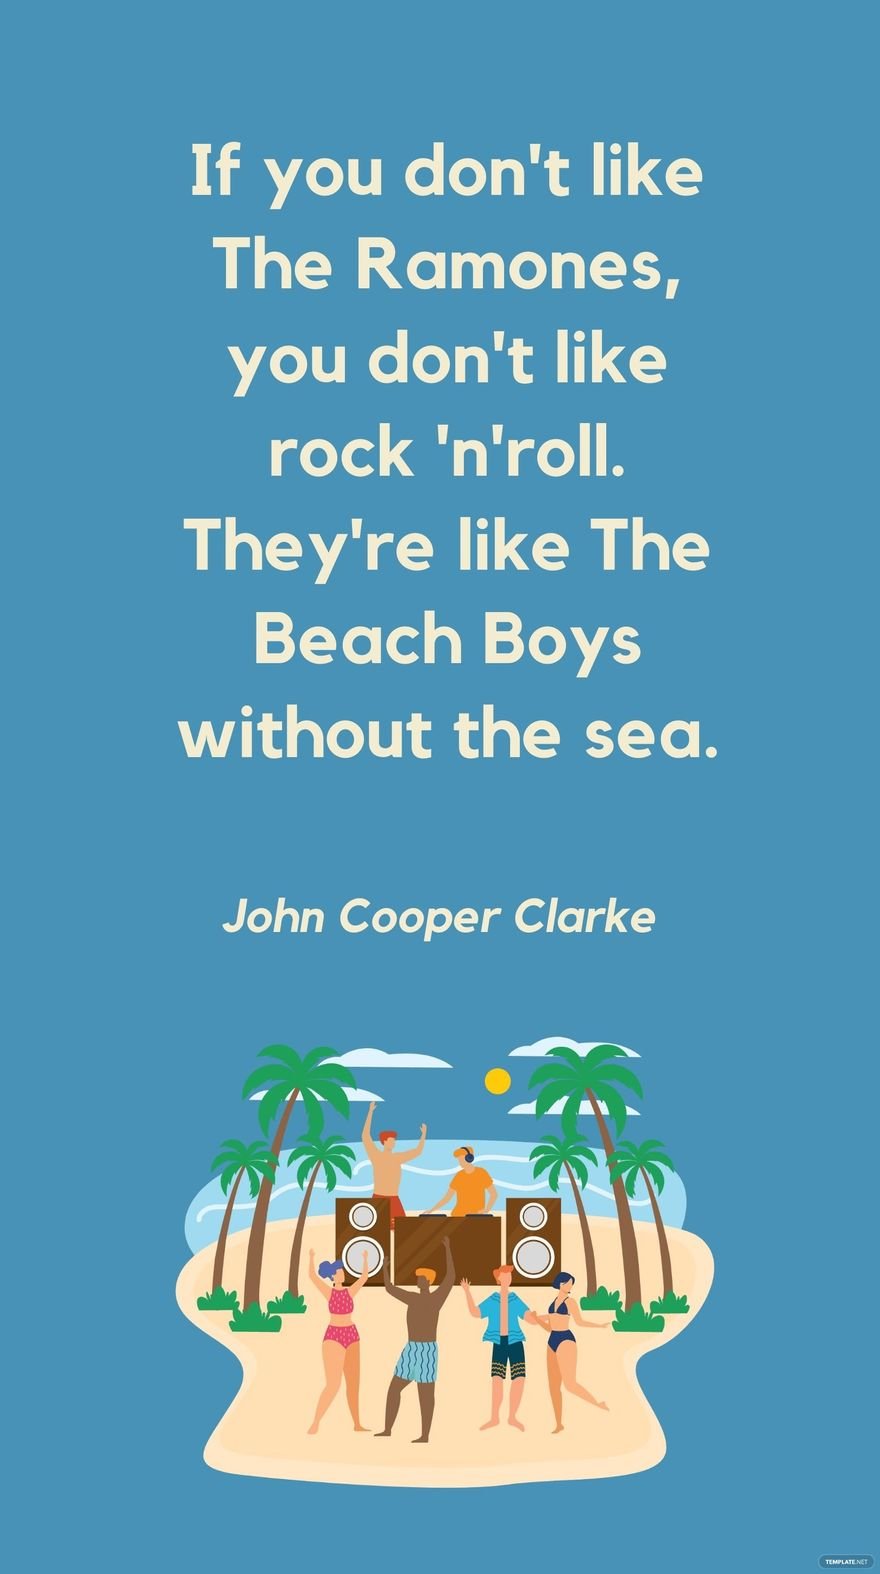 John Cooper Clarke - If you don't like The Ramones, you don't like rock 'n'roll. They're like The Beach Boys without the sea.